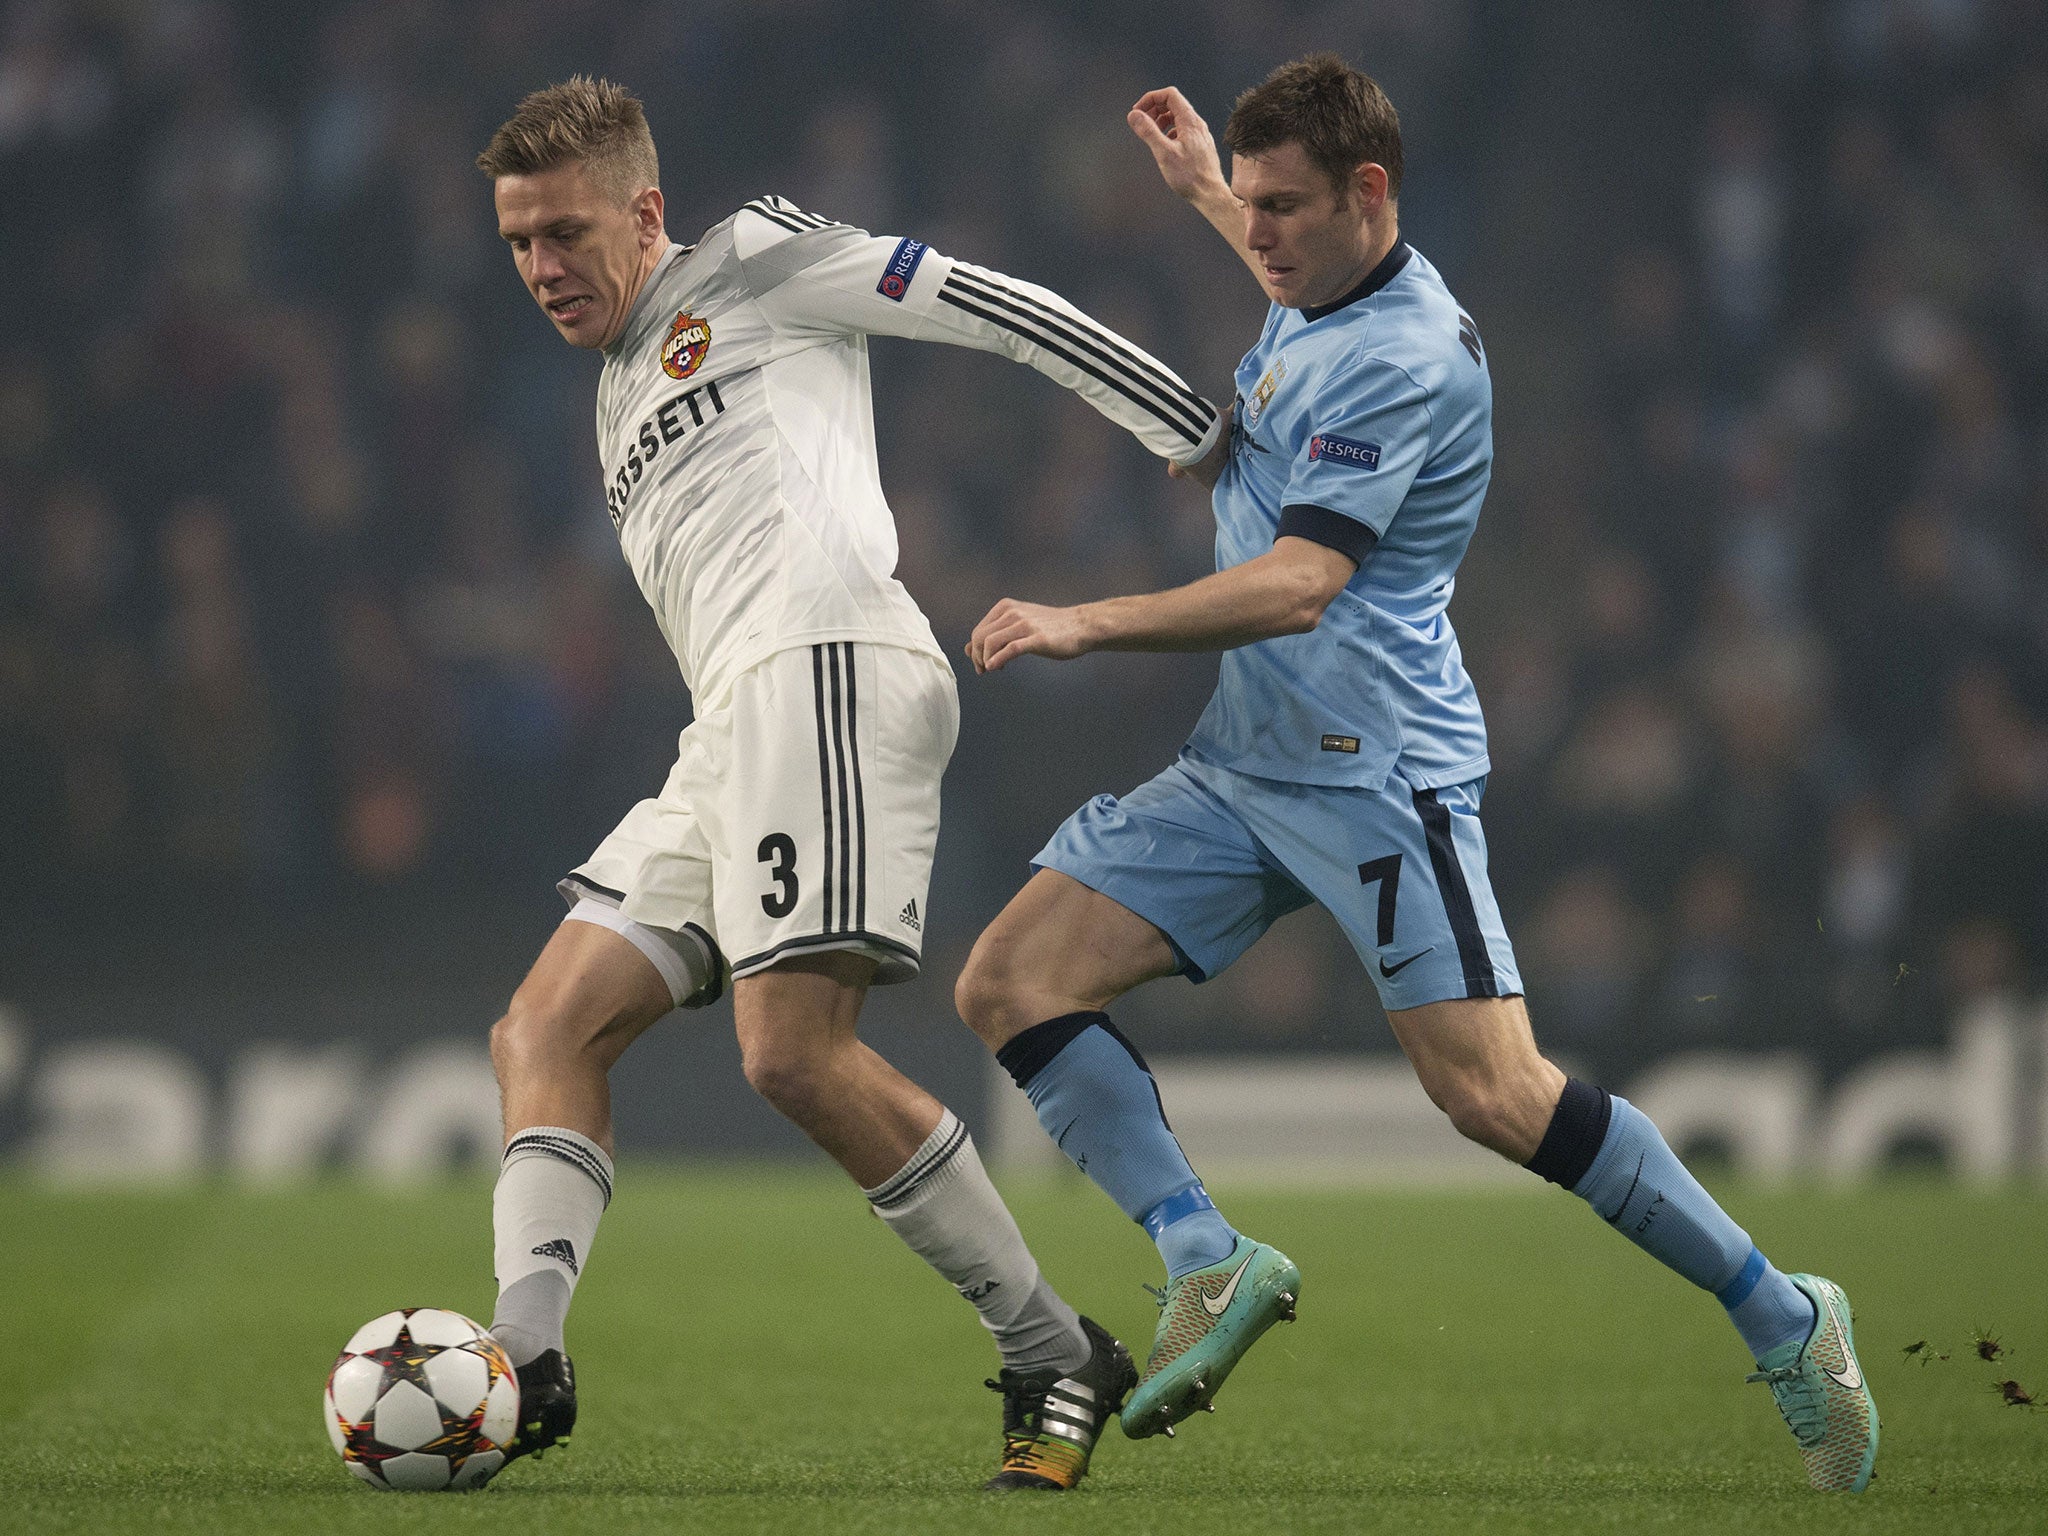 Pontus Wernbloom shields the ball away from James Milner